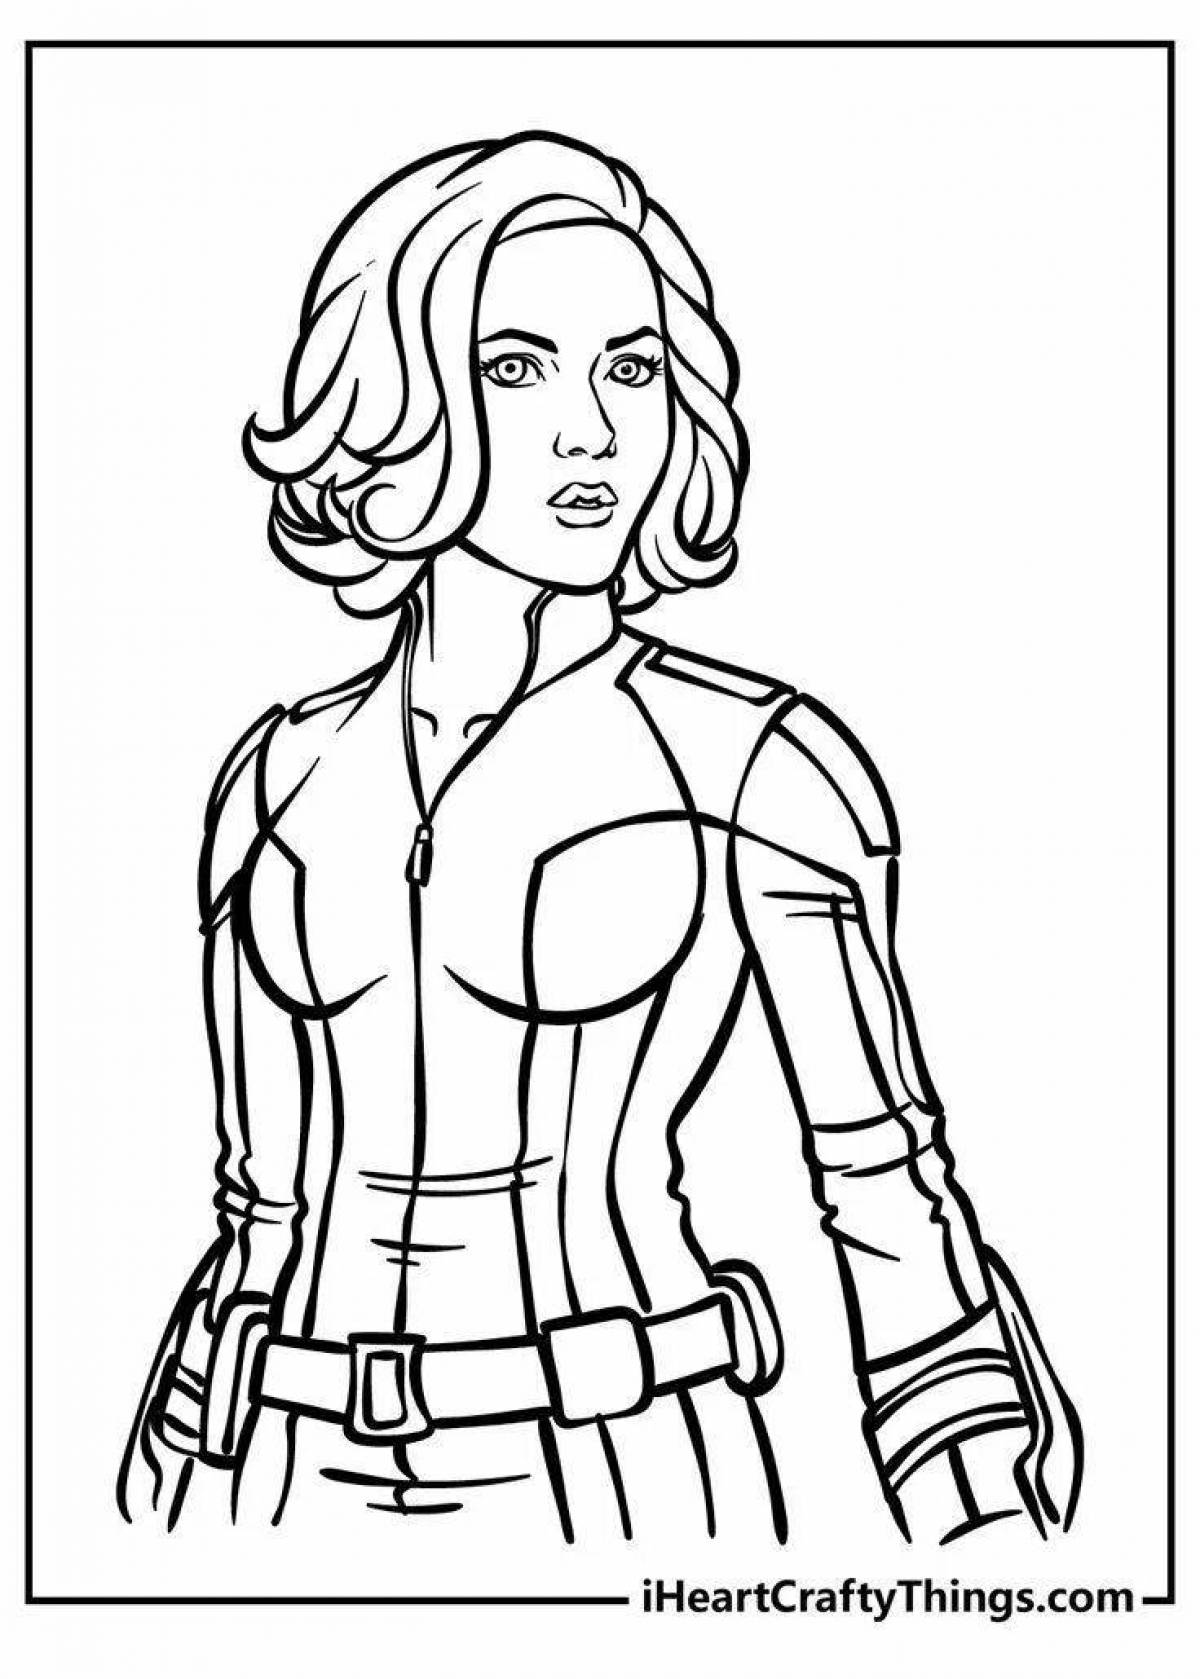 Glowing black widow coloring page